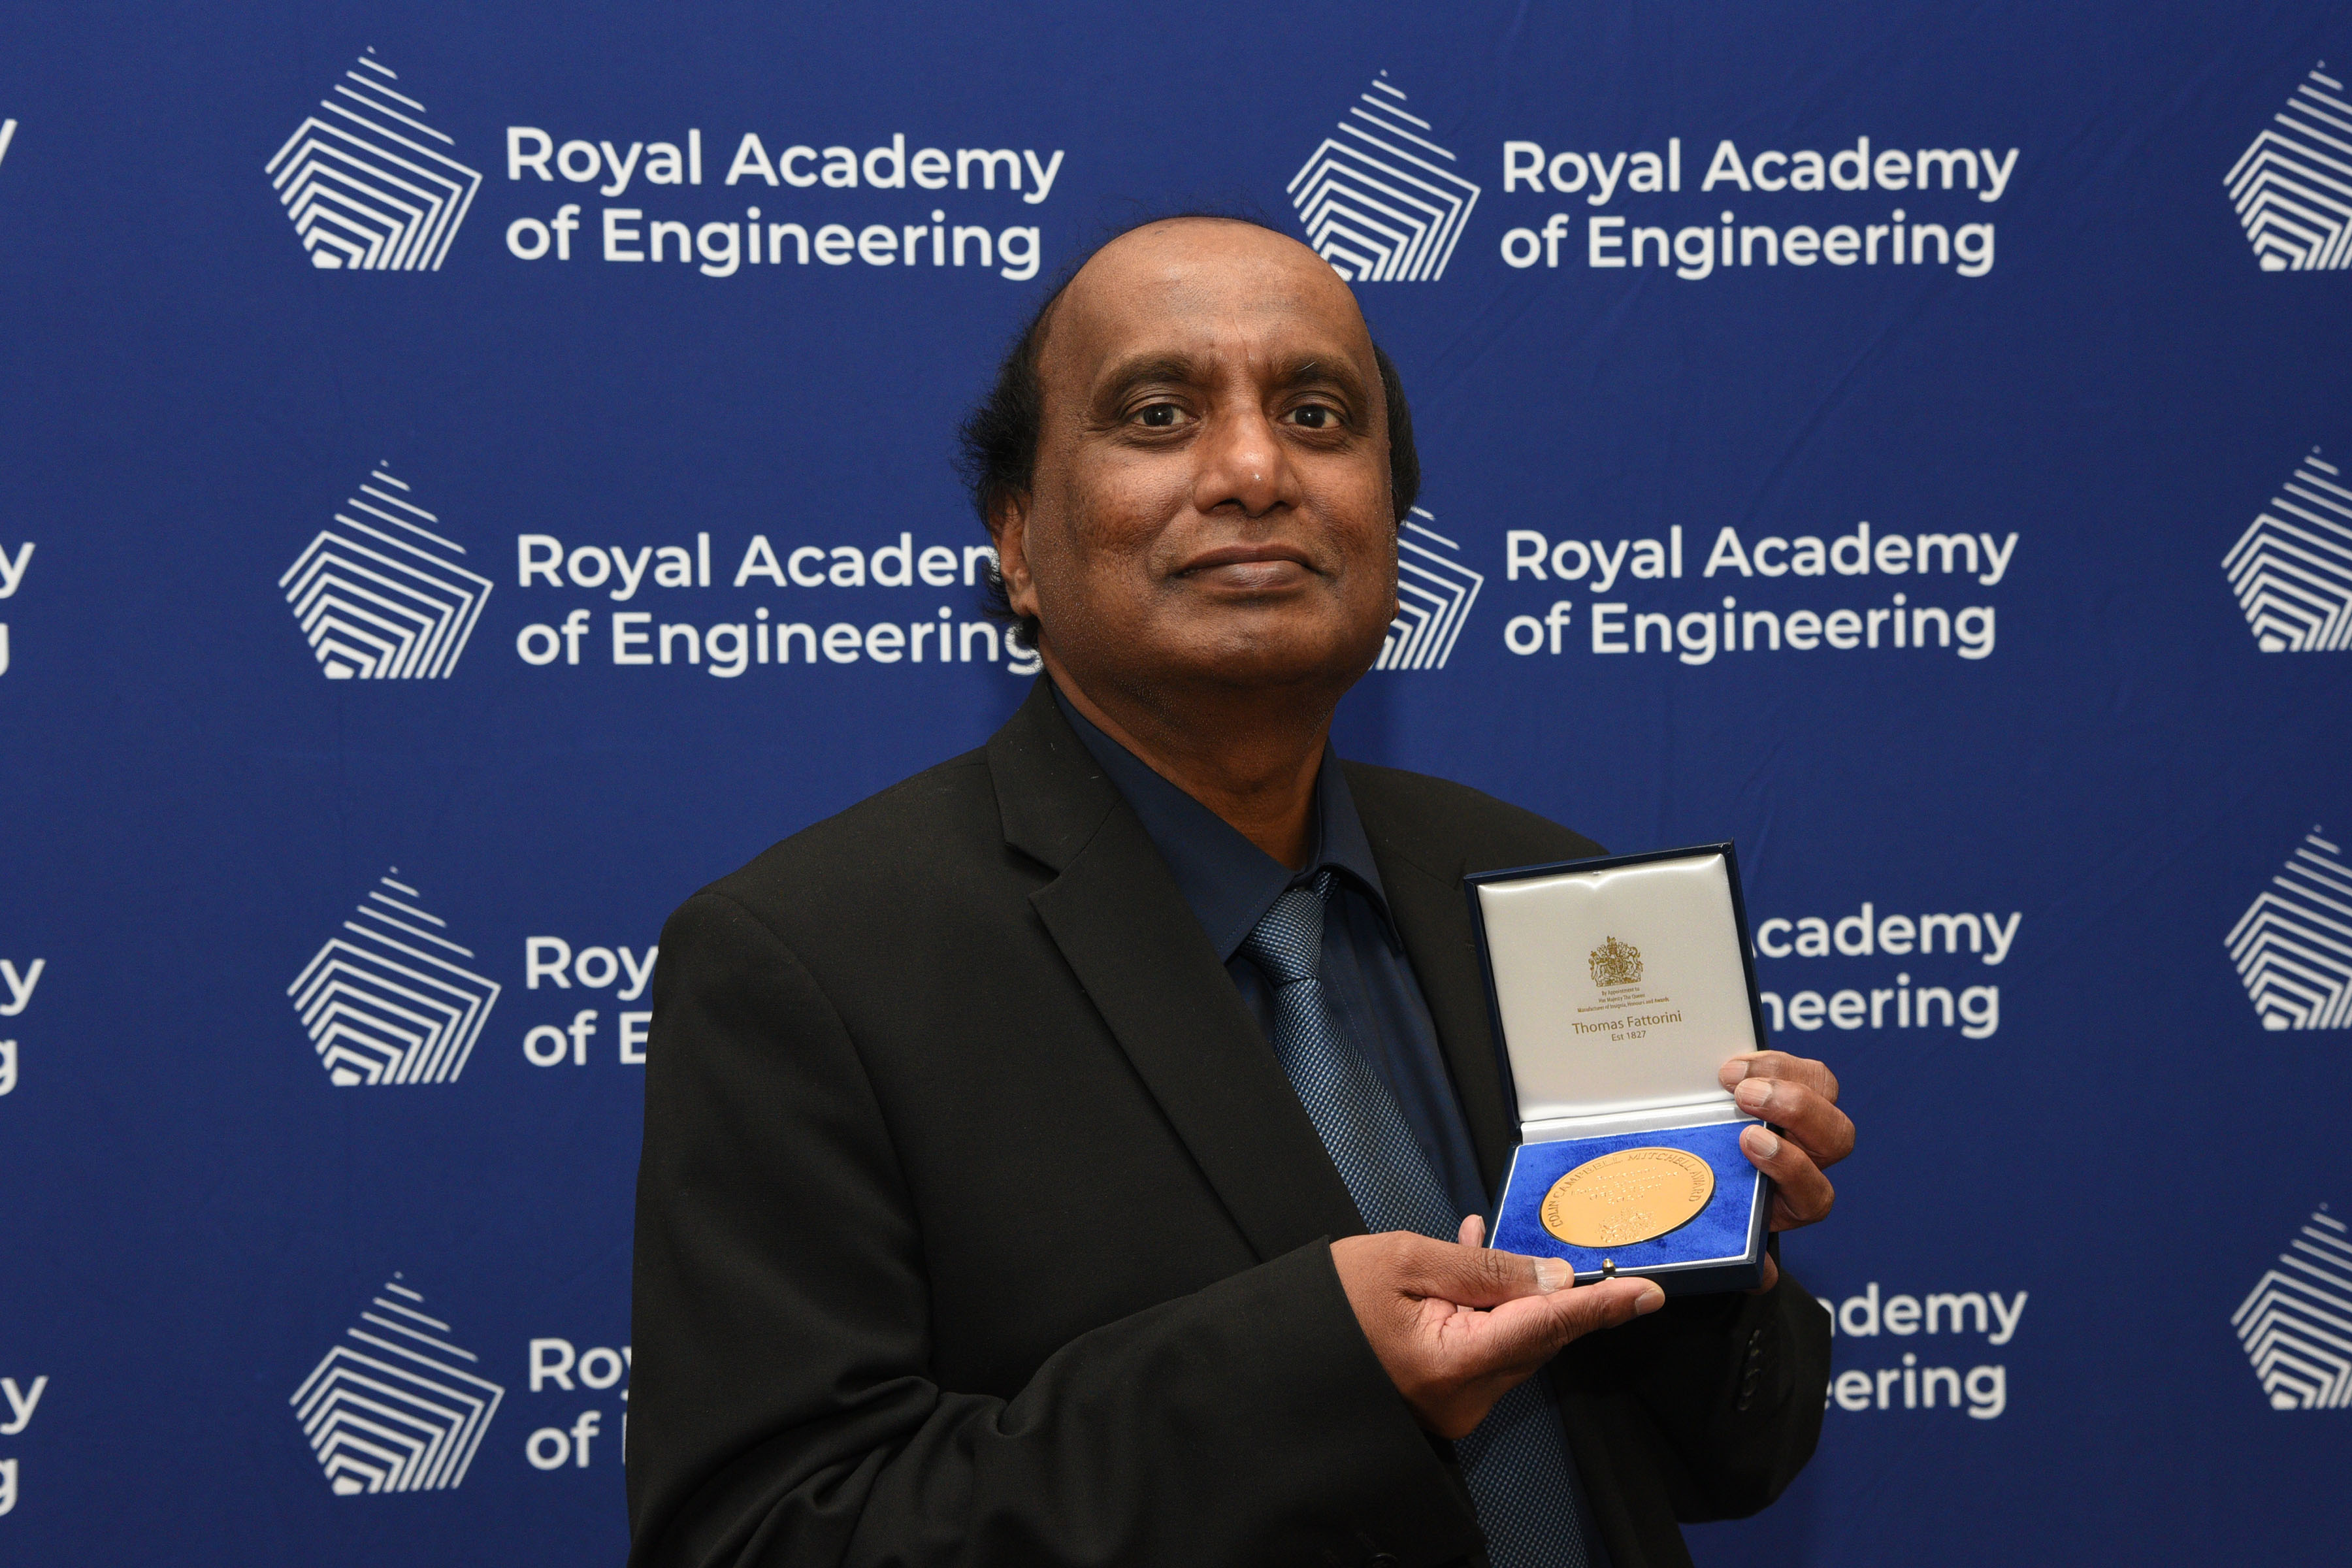 Professor Mohan Edirisinghe OBE FREng stood holding the Colin Campbell Mitchell Award in front of a blue screen with the Royal Academy of Engineering logo